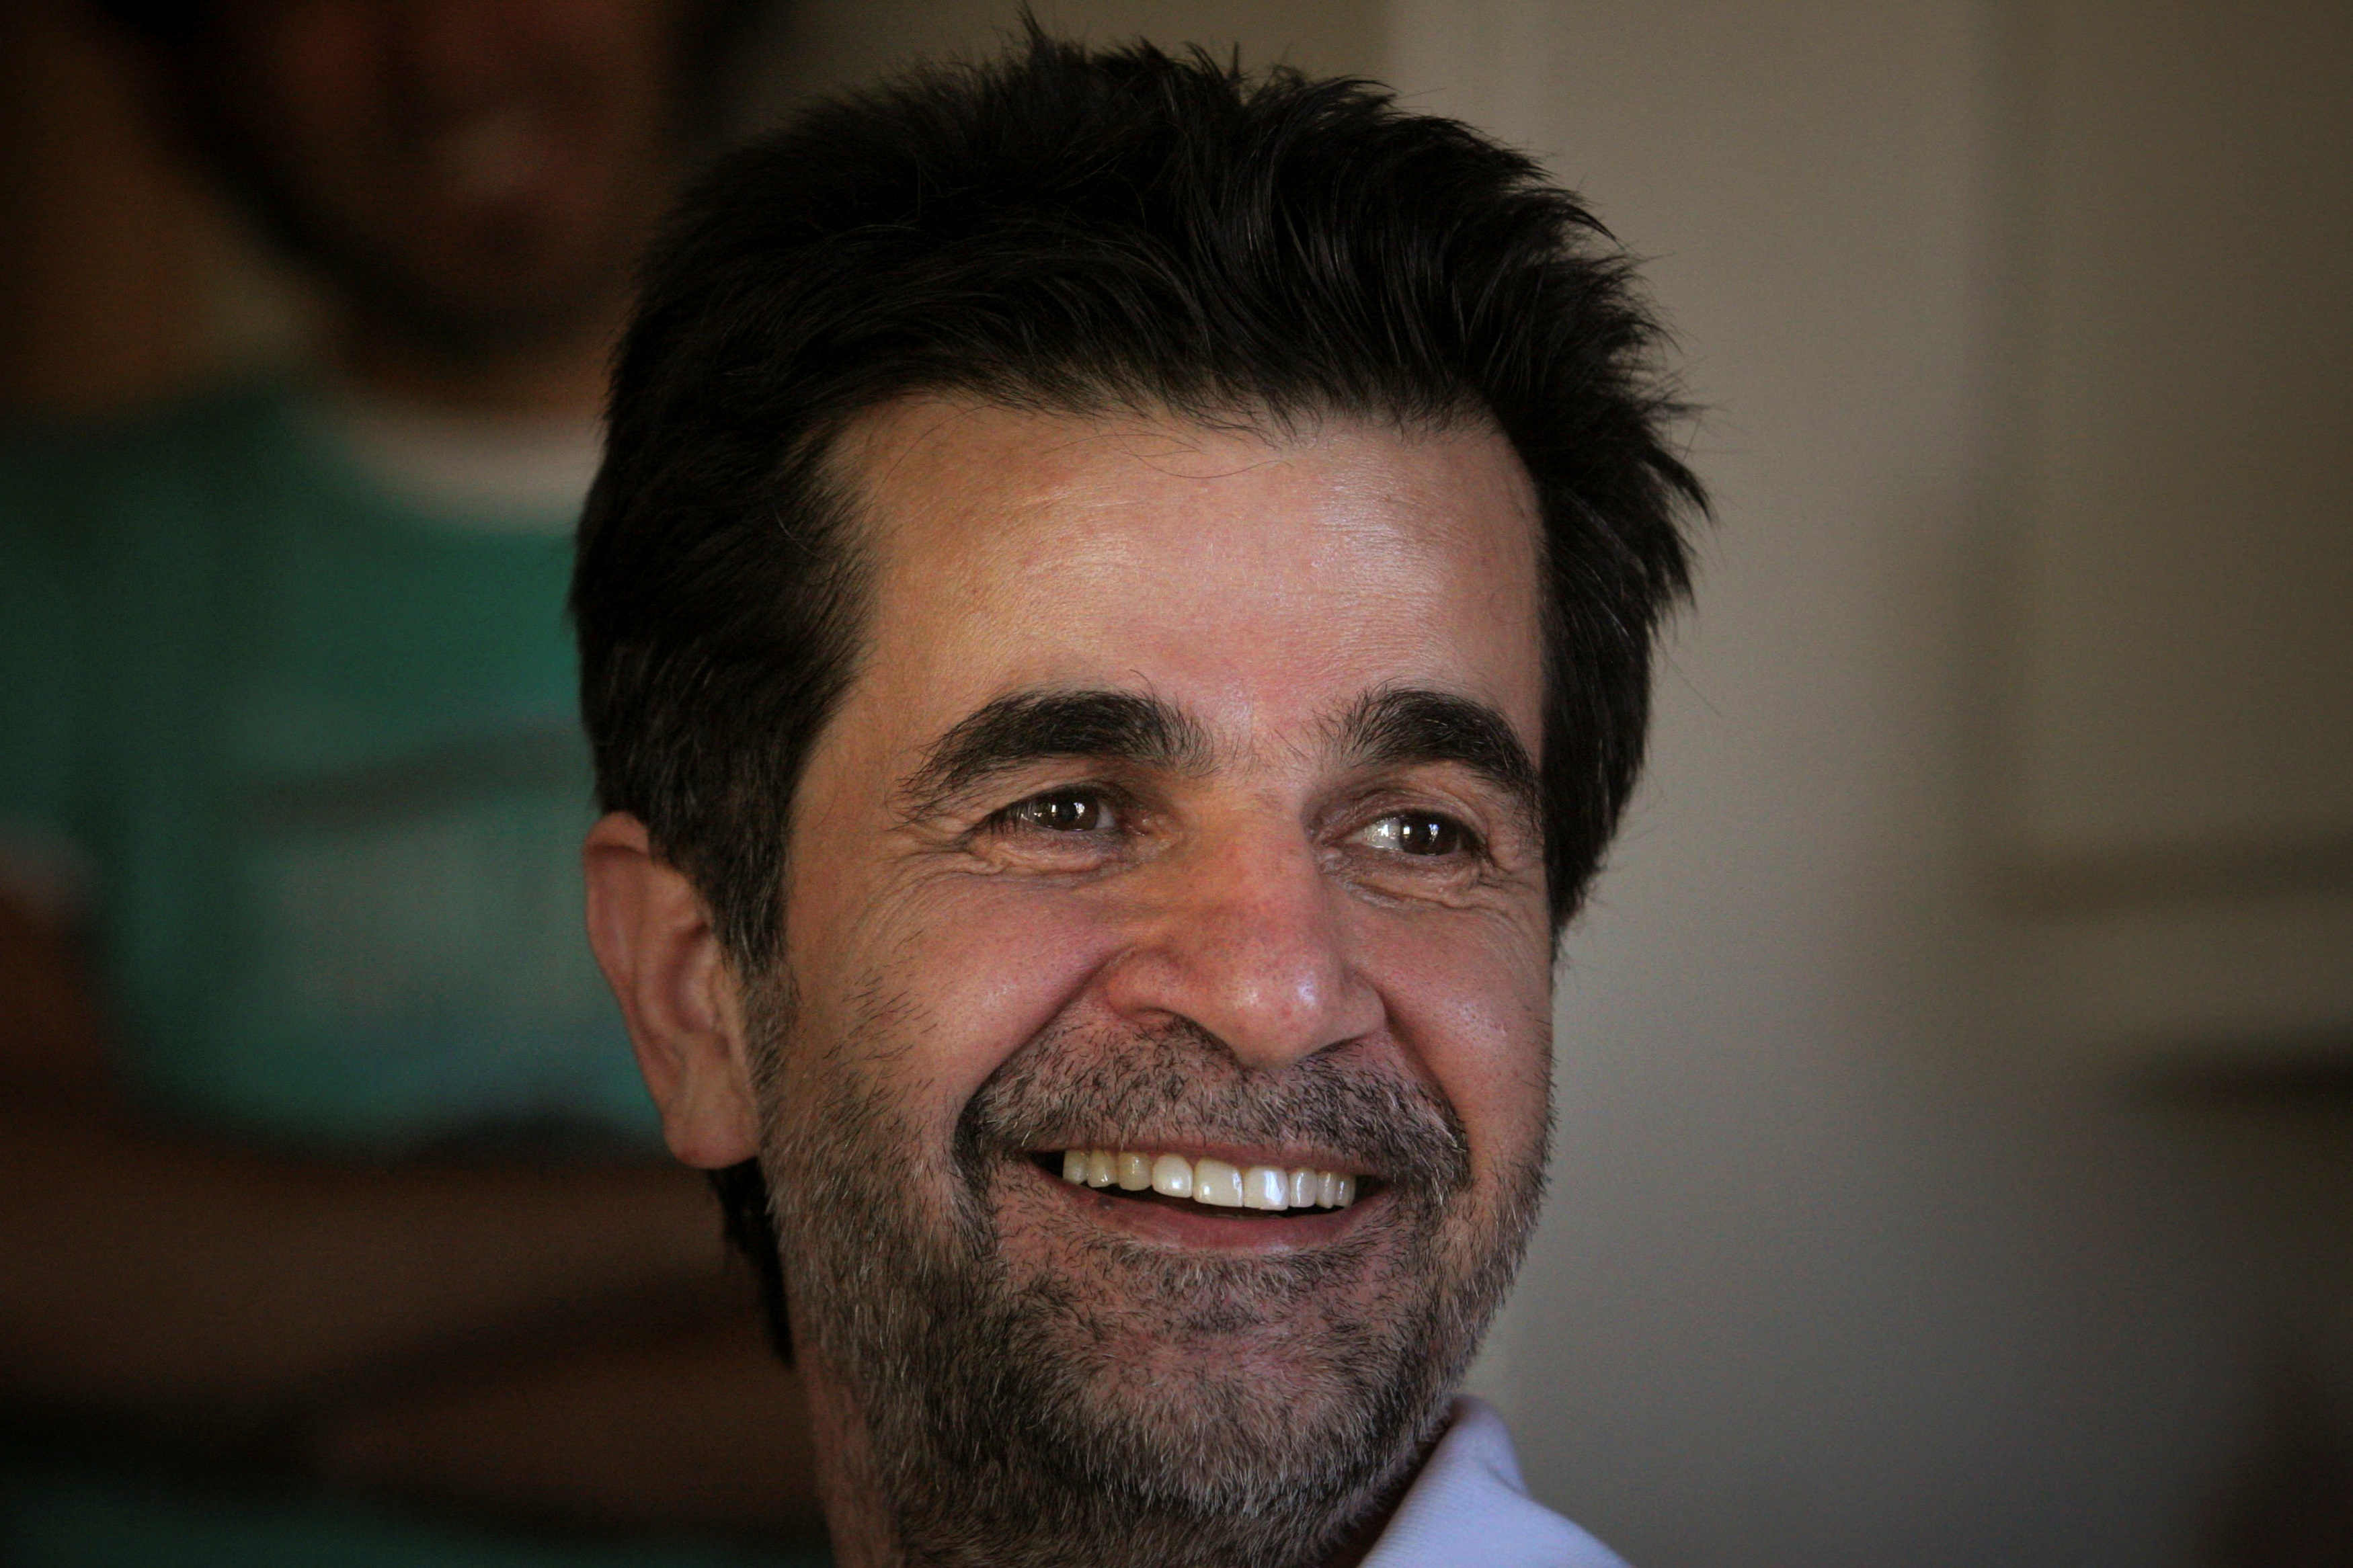 FILE PHOTO: Iranian film director Jafar Panahi smiles, following his release on bail, at his home in Tehran